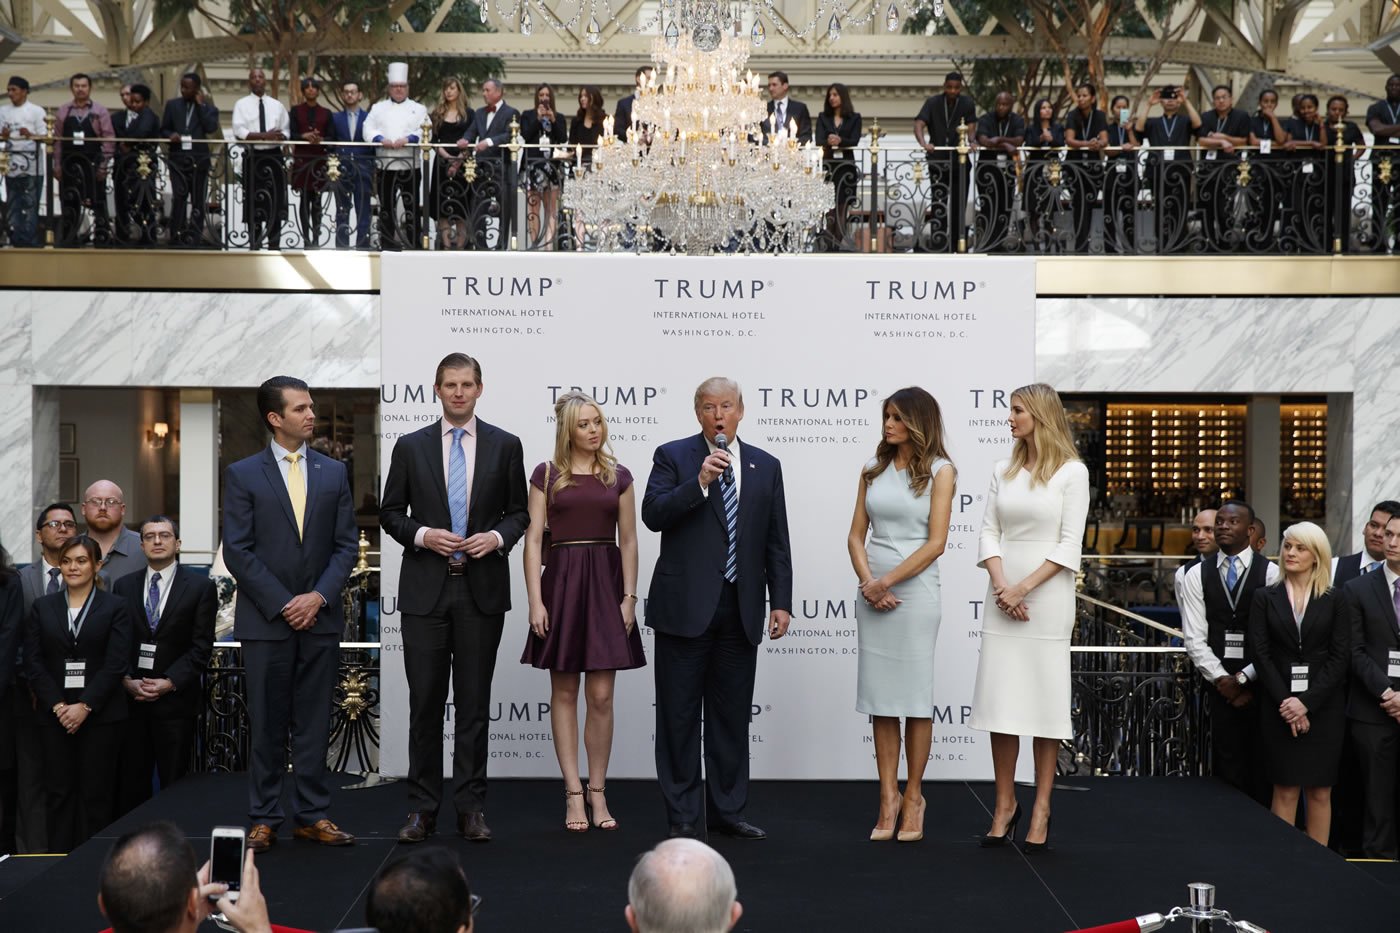 Donald Trump’s woes continue as the travel industry’s most important luxury travel agency has removed all Trump hotels and resorts from its network